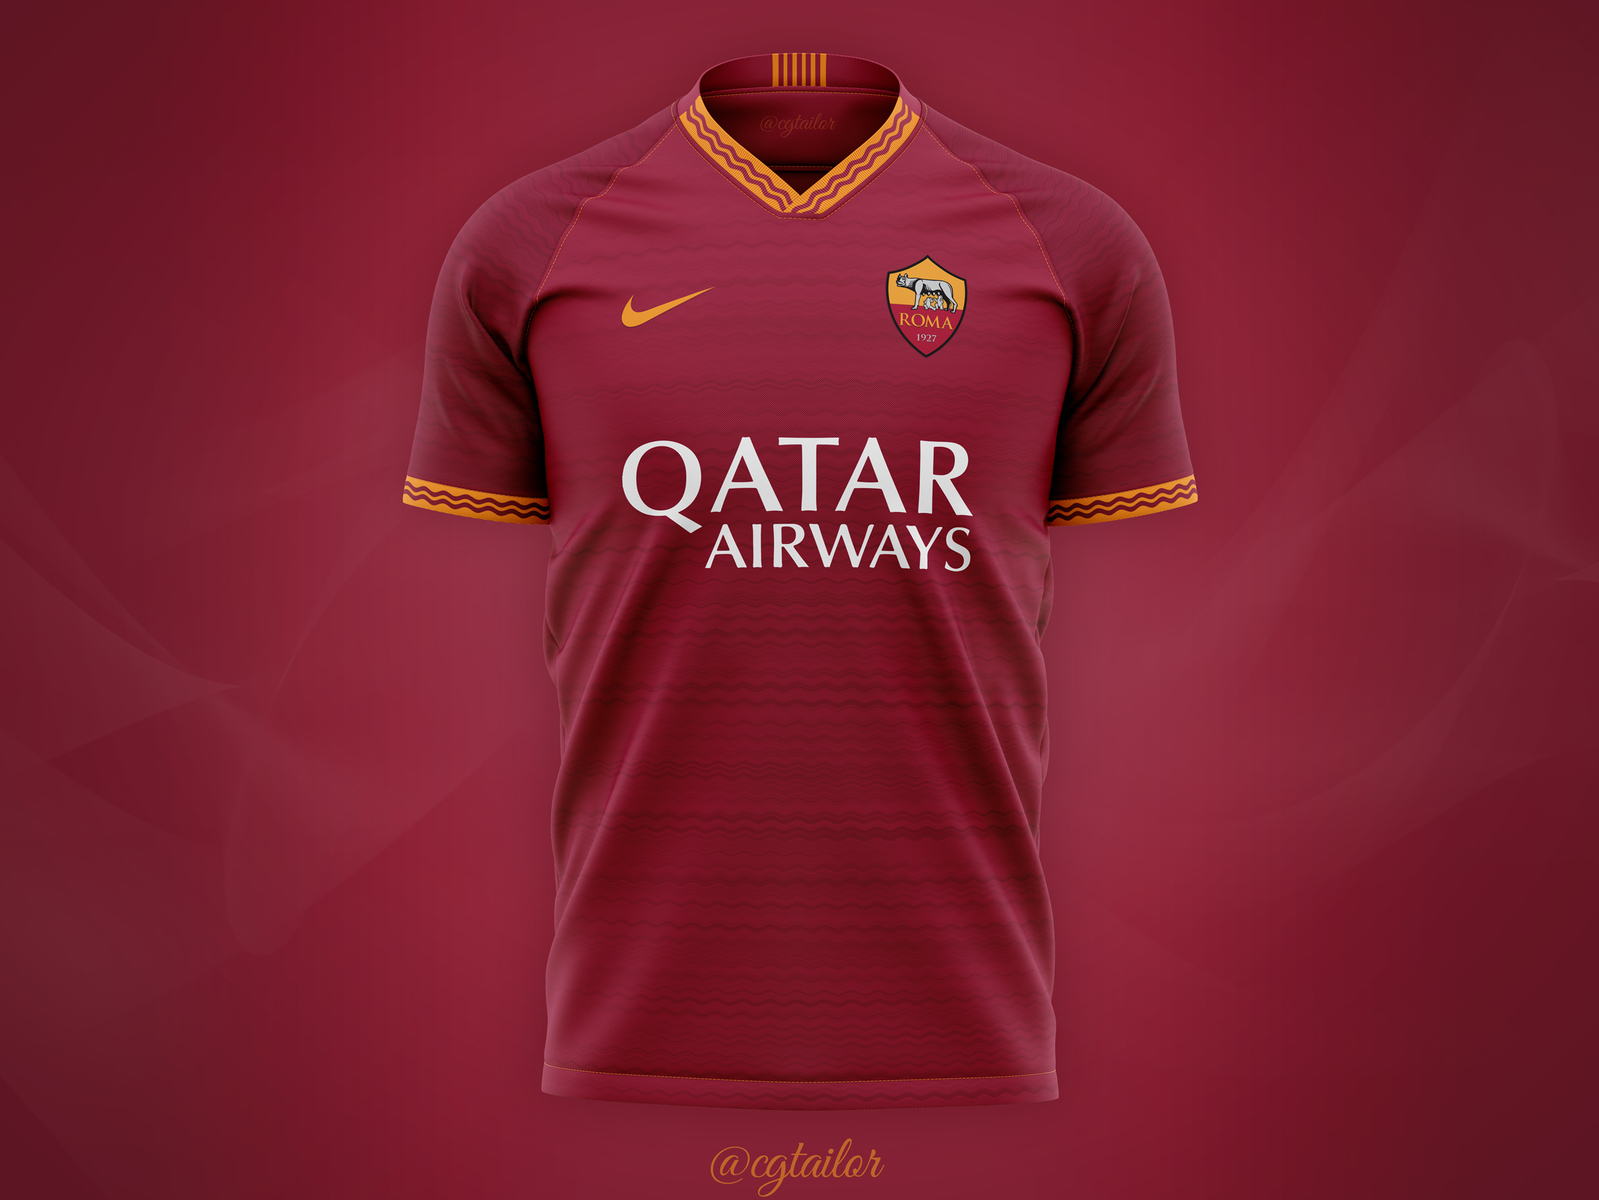 Football / Soccer Concept for AS Roma by @cgtailor by CG Tailor on Dribbble